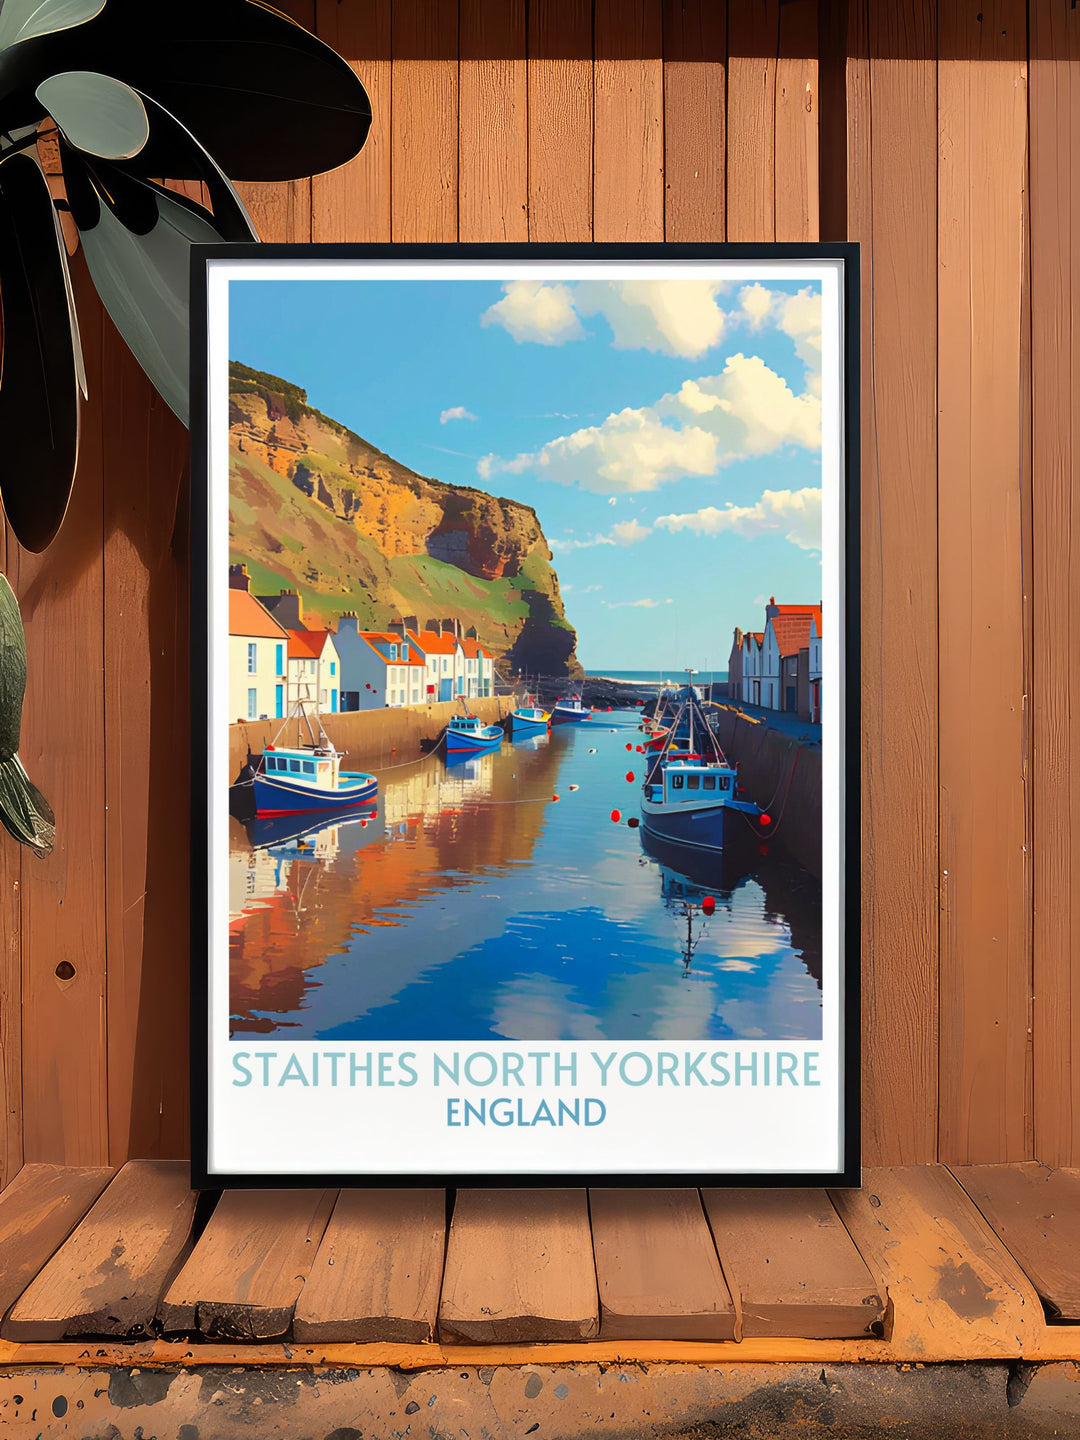 High quality art print of Staithes North Yorkshire, depicting the scenic coastal village and its tranquil harbor. Ideal for creating a serene and charming atmosphere in your home.